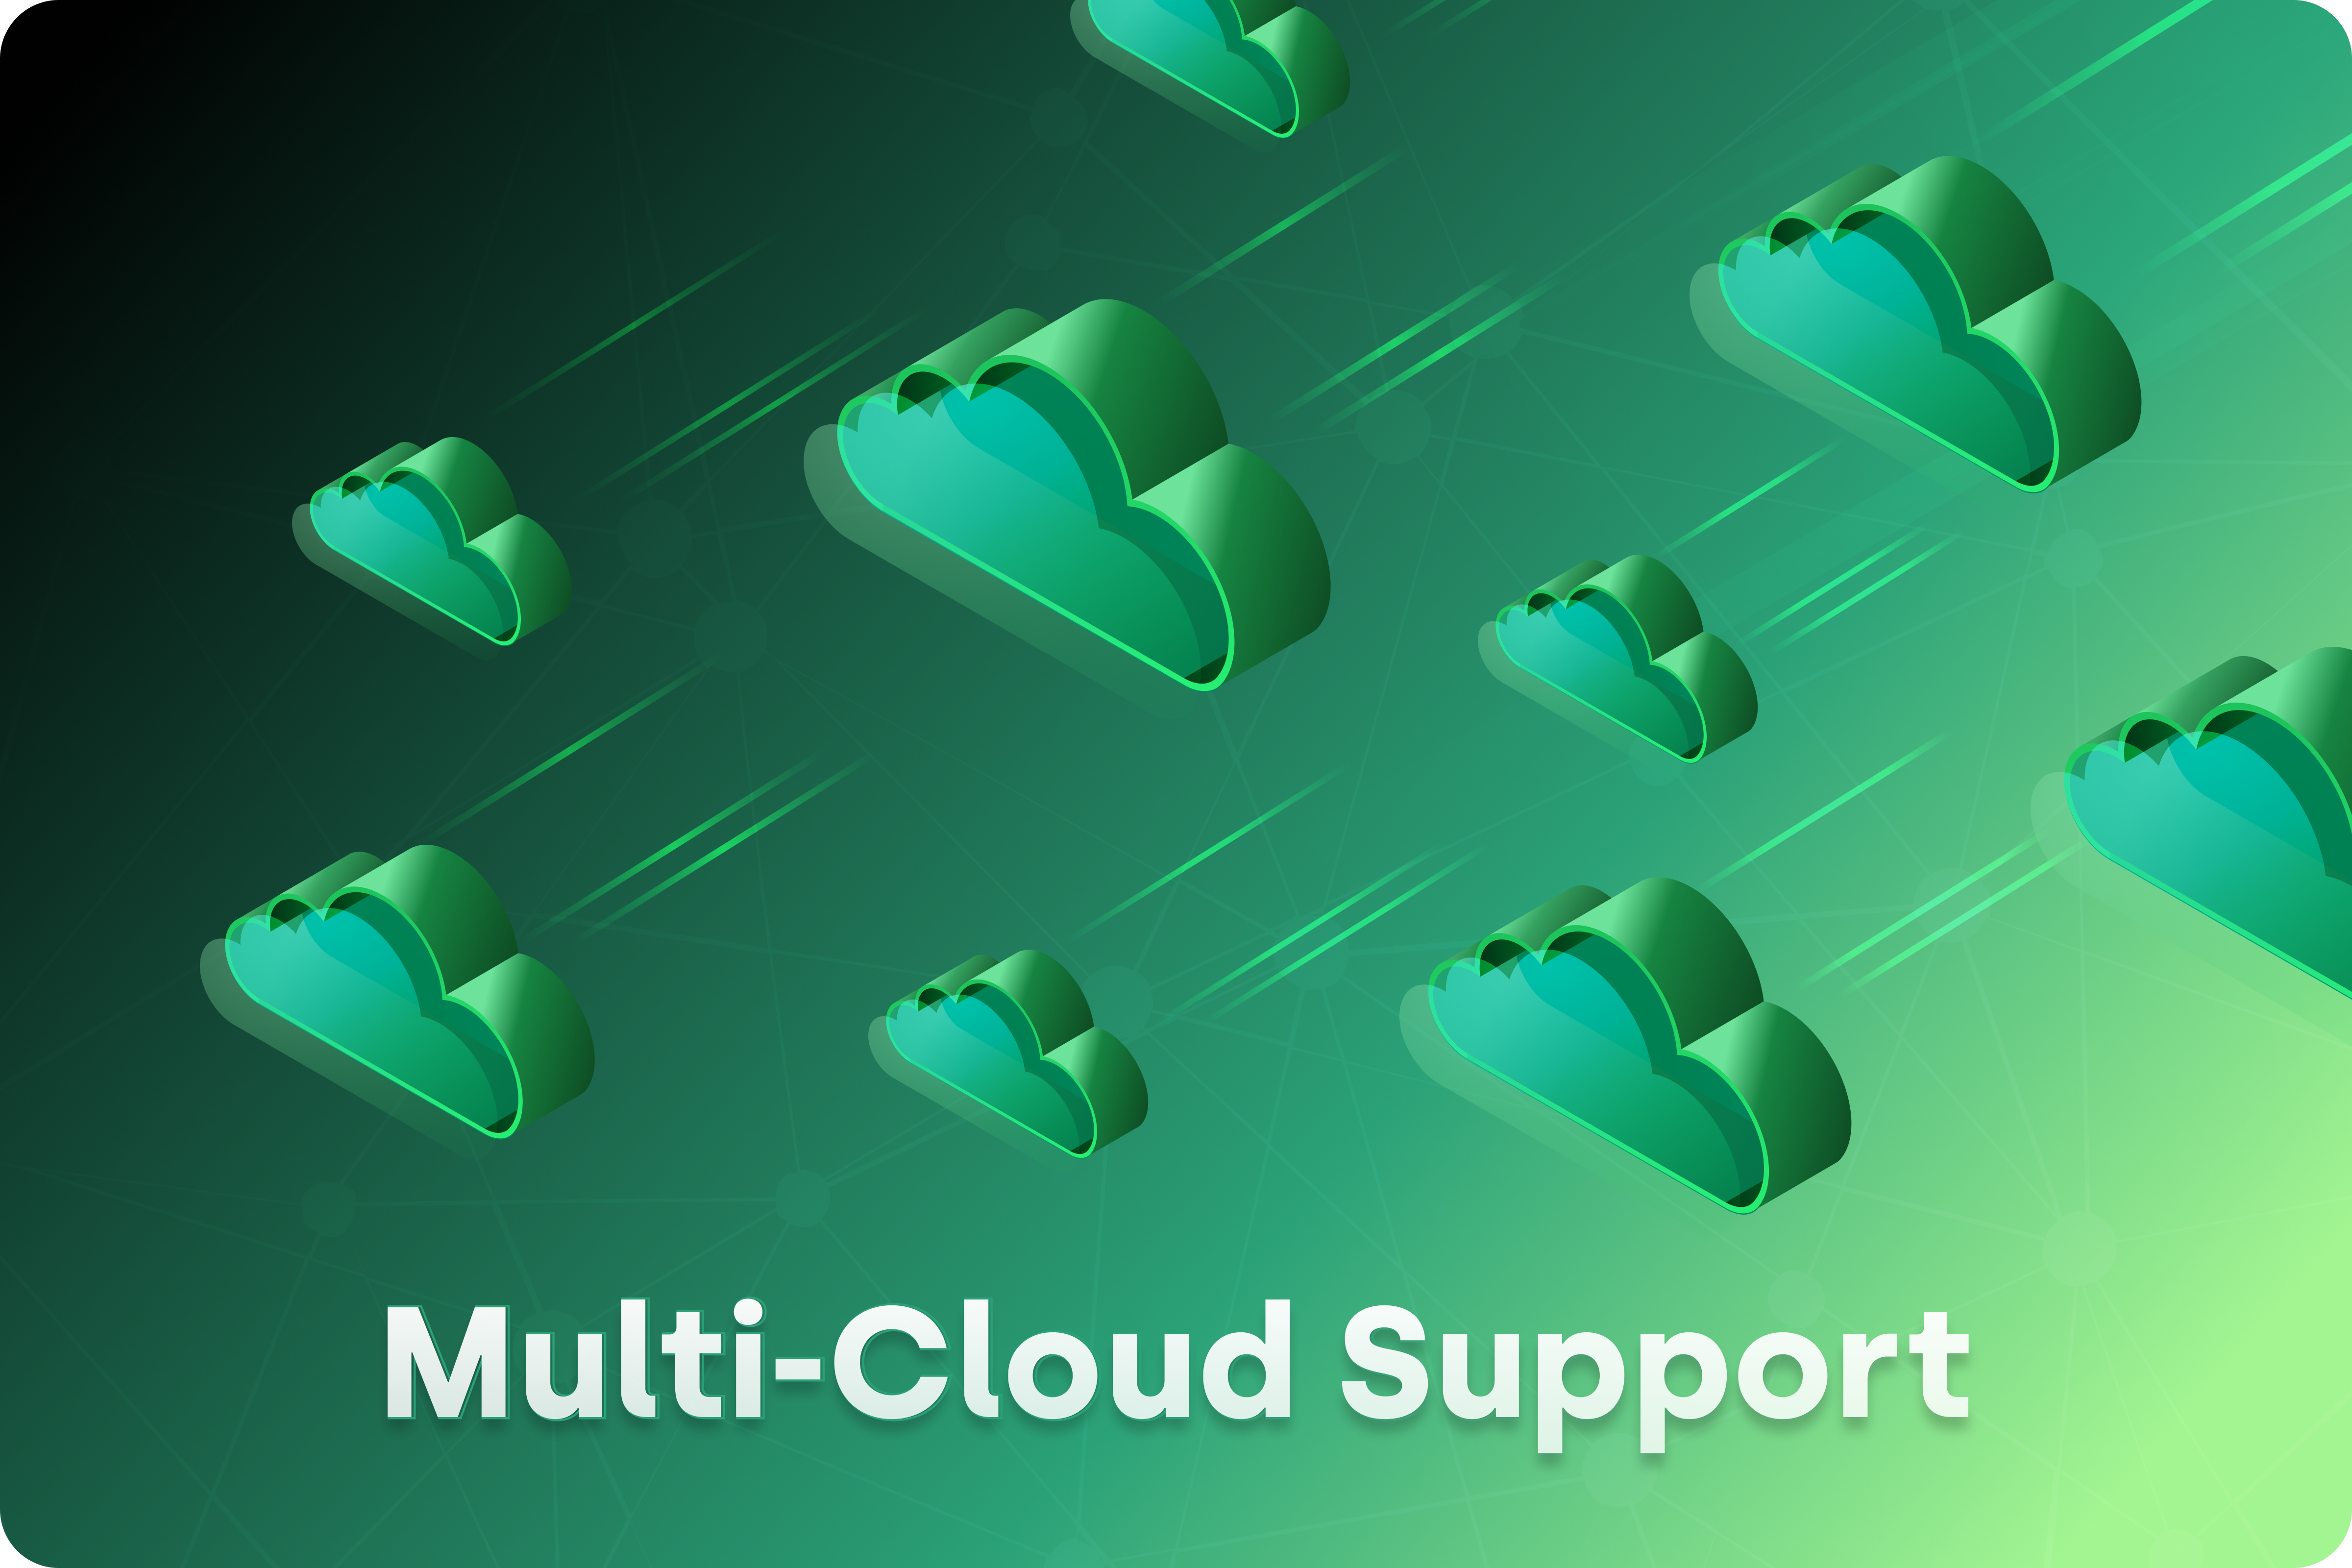 Laminar First to Fully Support Multi-Cloud Architectures